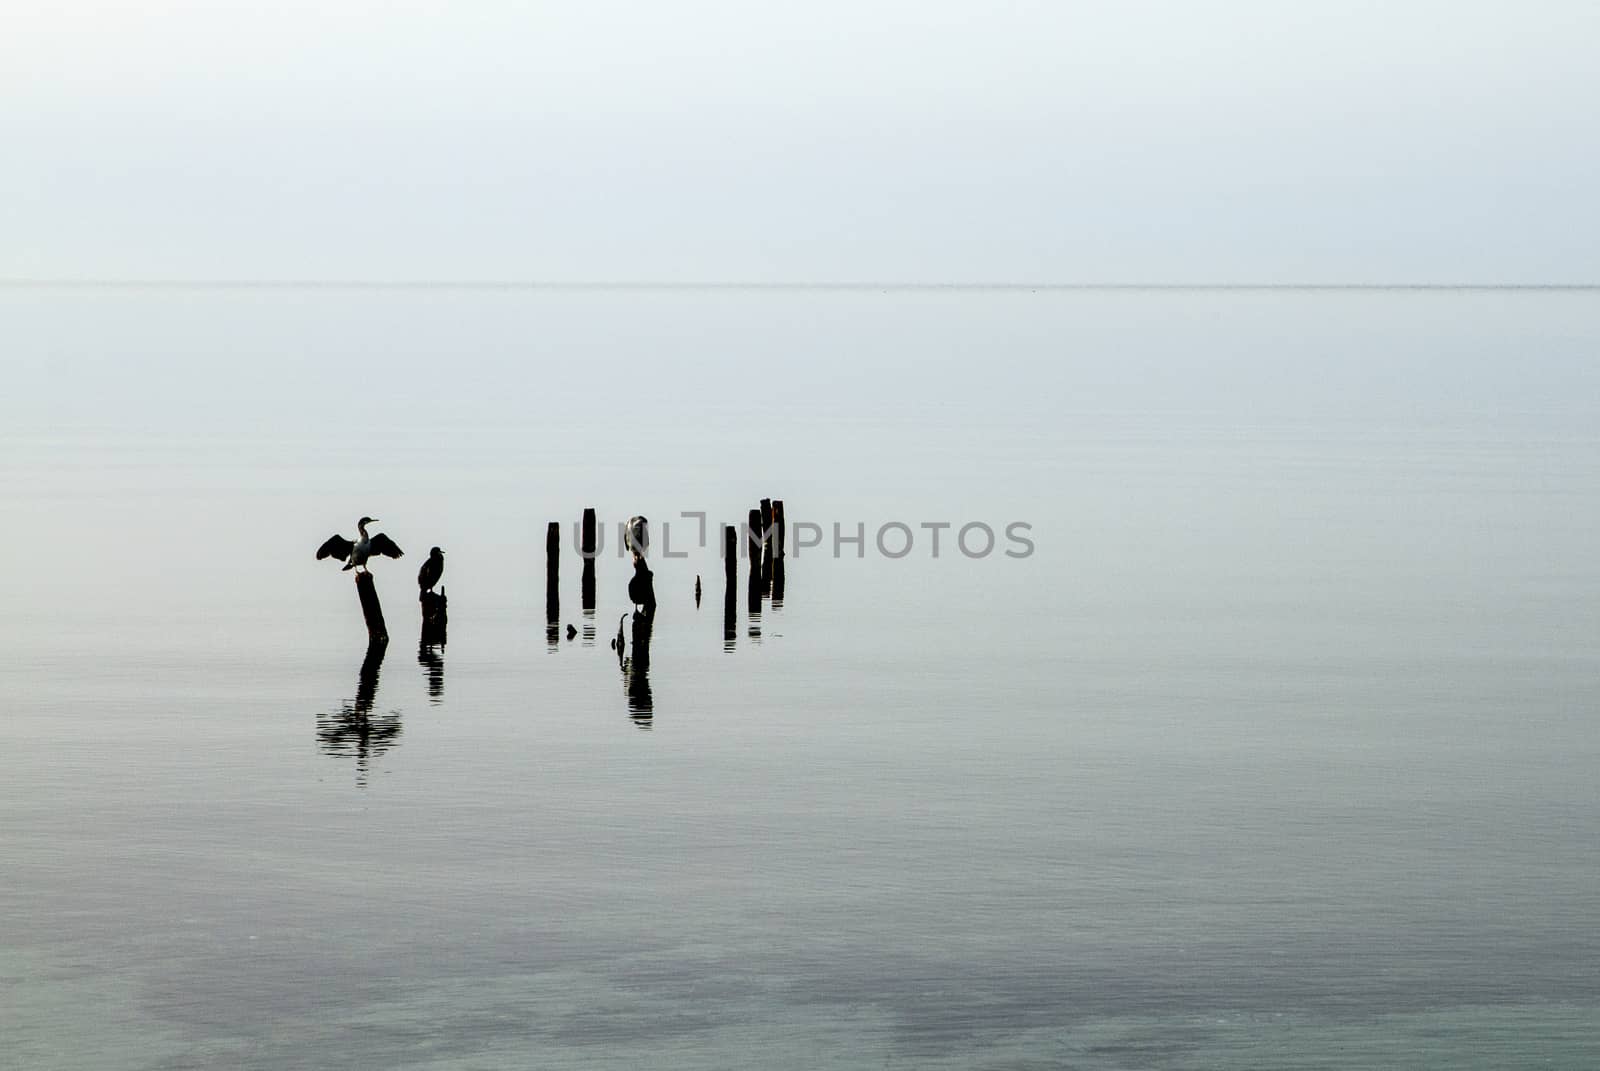 Three cormorants perched on poles that emerge from the flat wate by robbyfontanesi